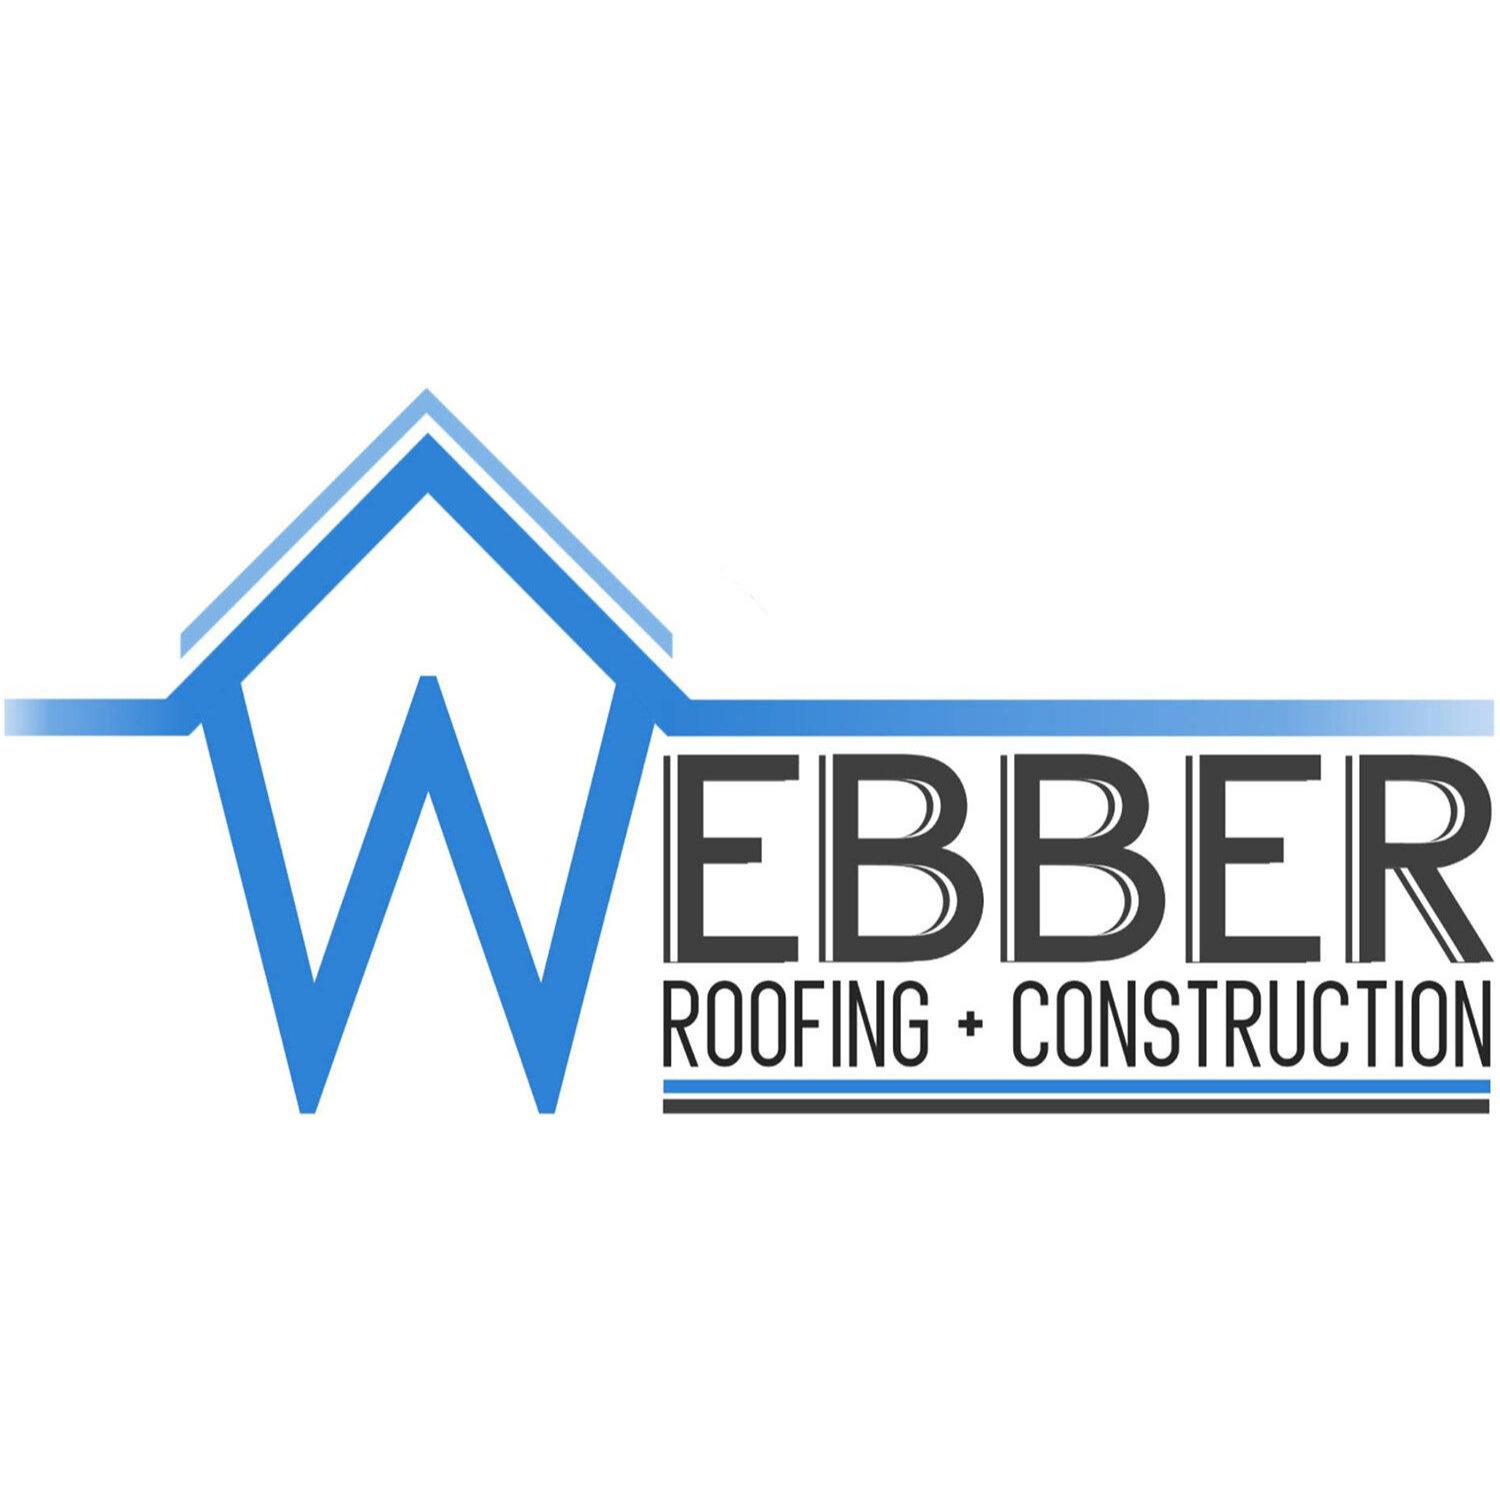 Webber Roofing & Construction